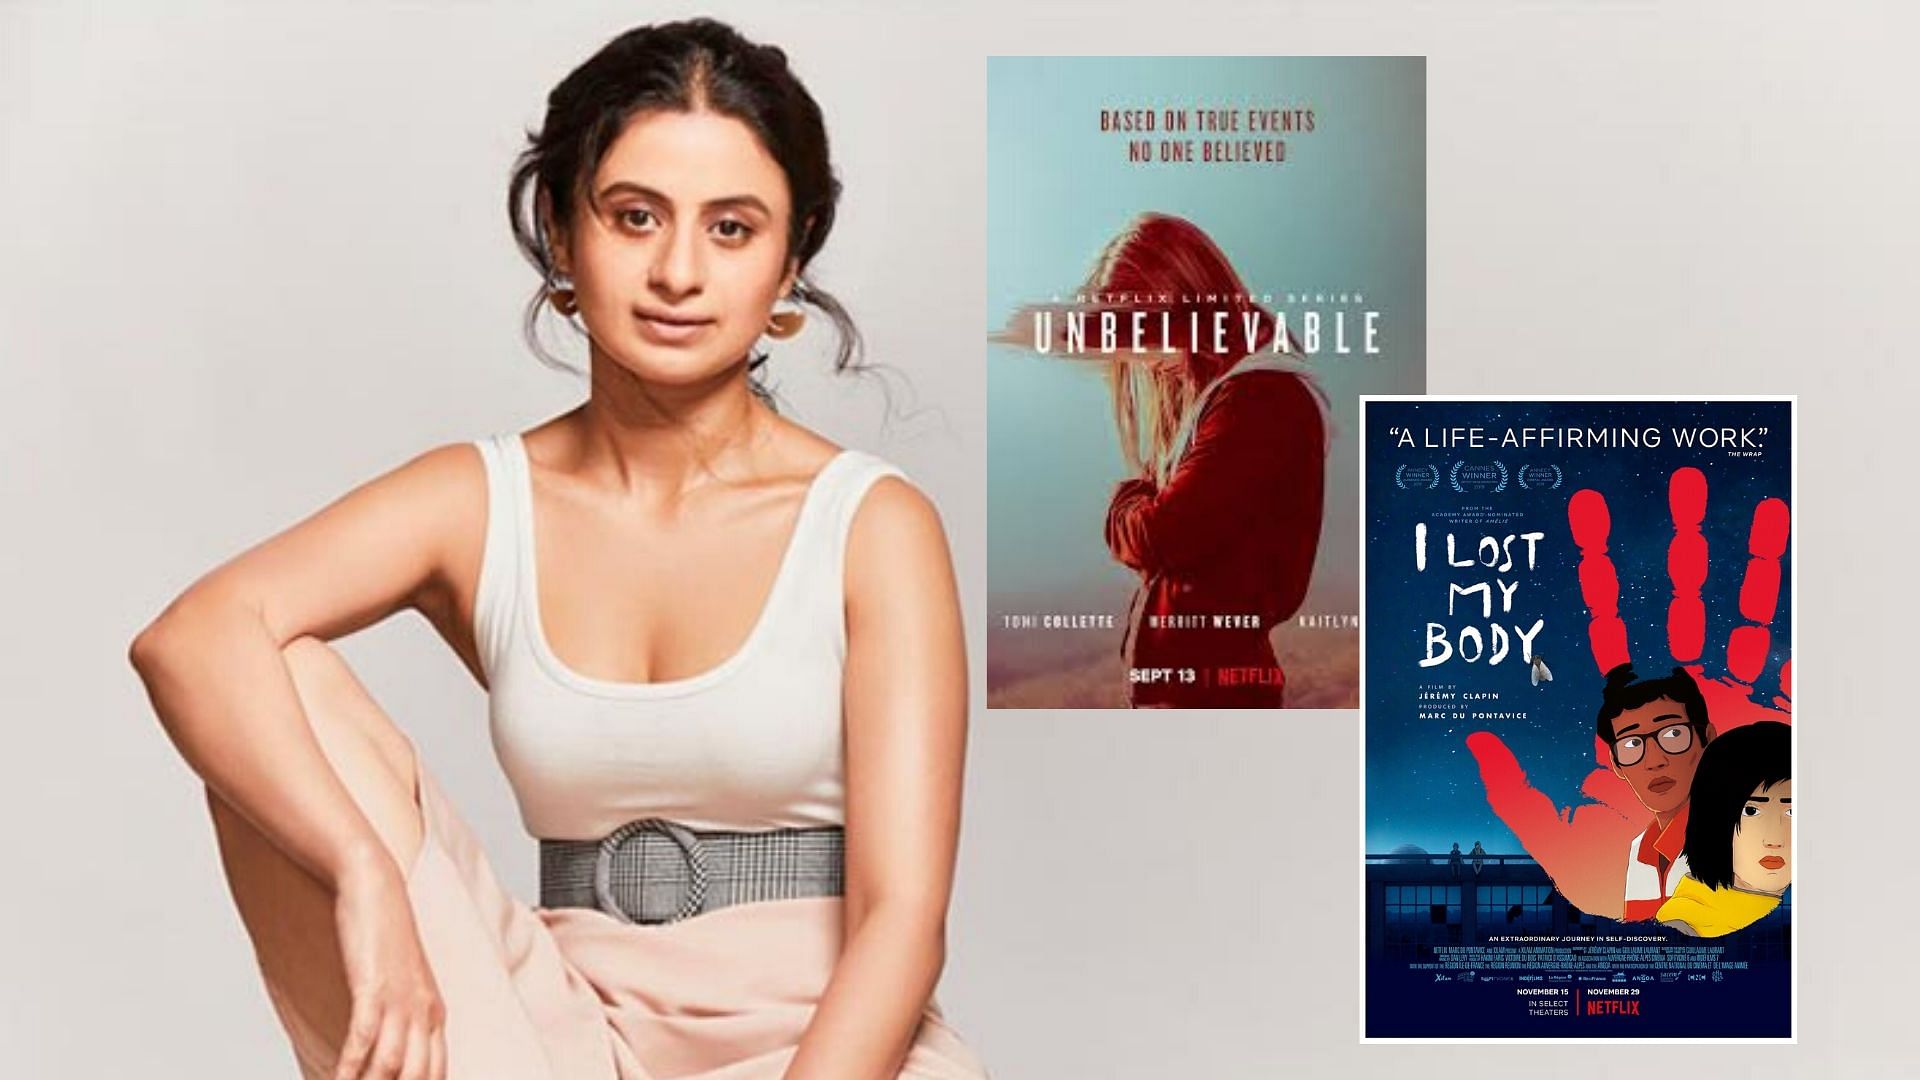 Rasika Dugal offers her recommendation of shows and films to binge on in quarantine.